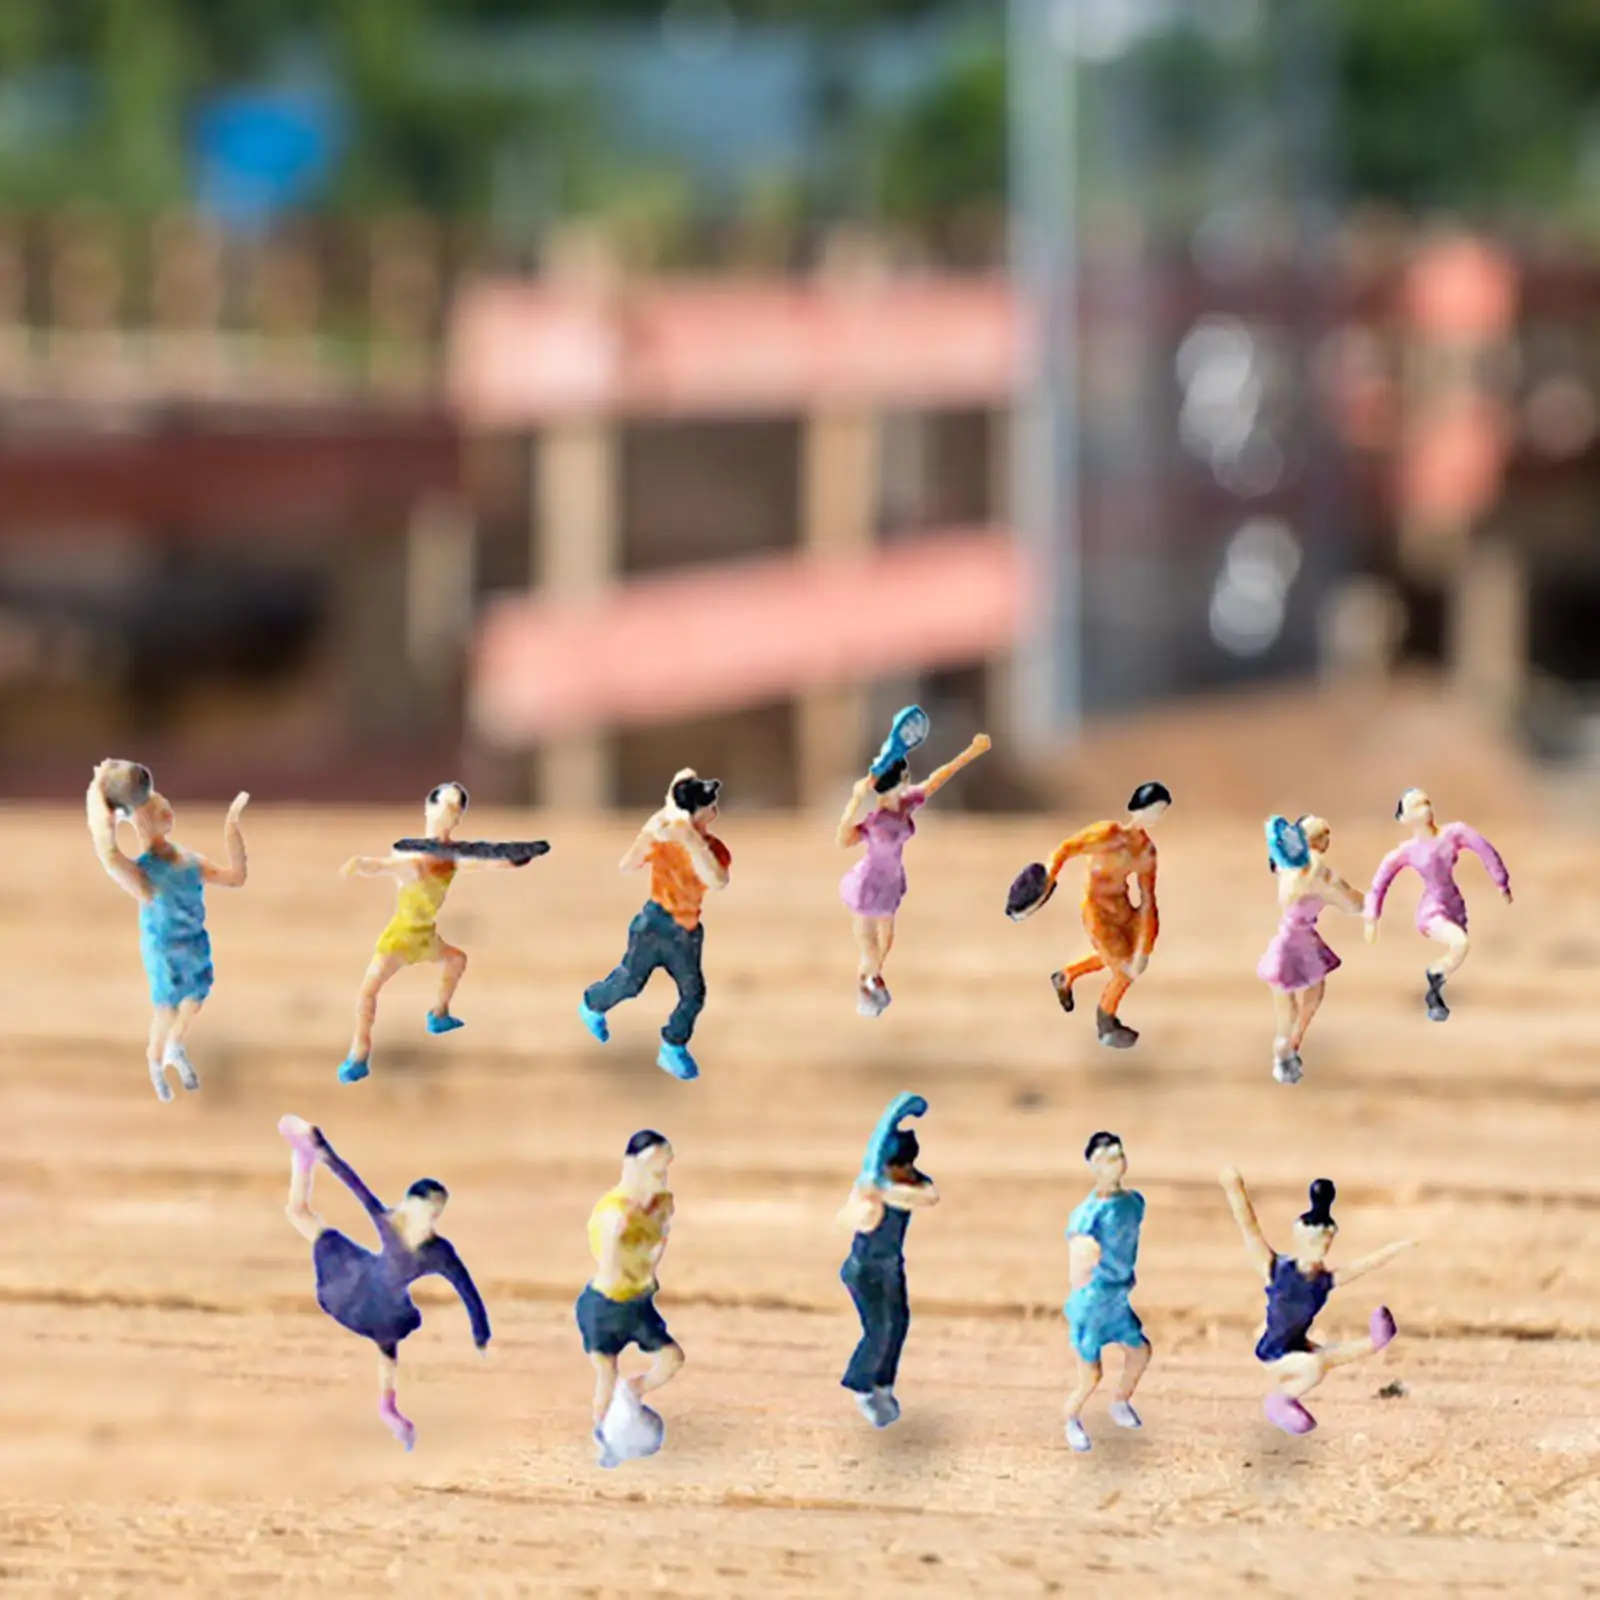 Mini Figurines Player Figure Ornament DIY Layout Scenery Accs Tiny People Miniature Sport Player Figurines for Dollhouse Decor